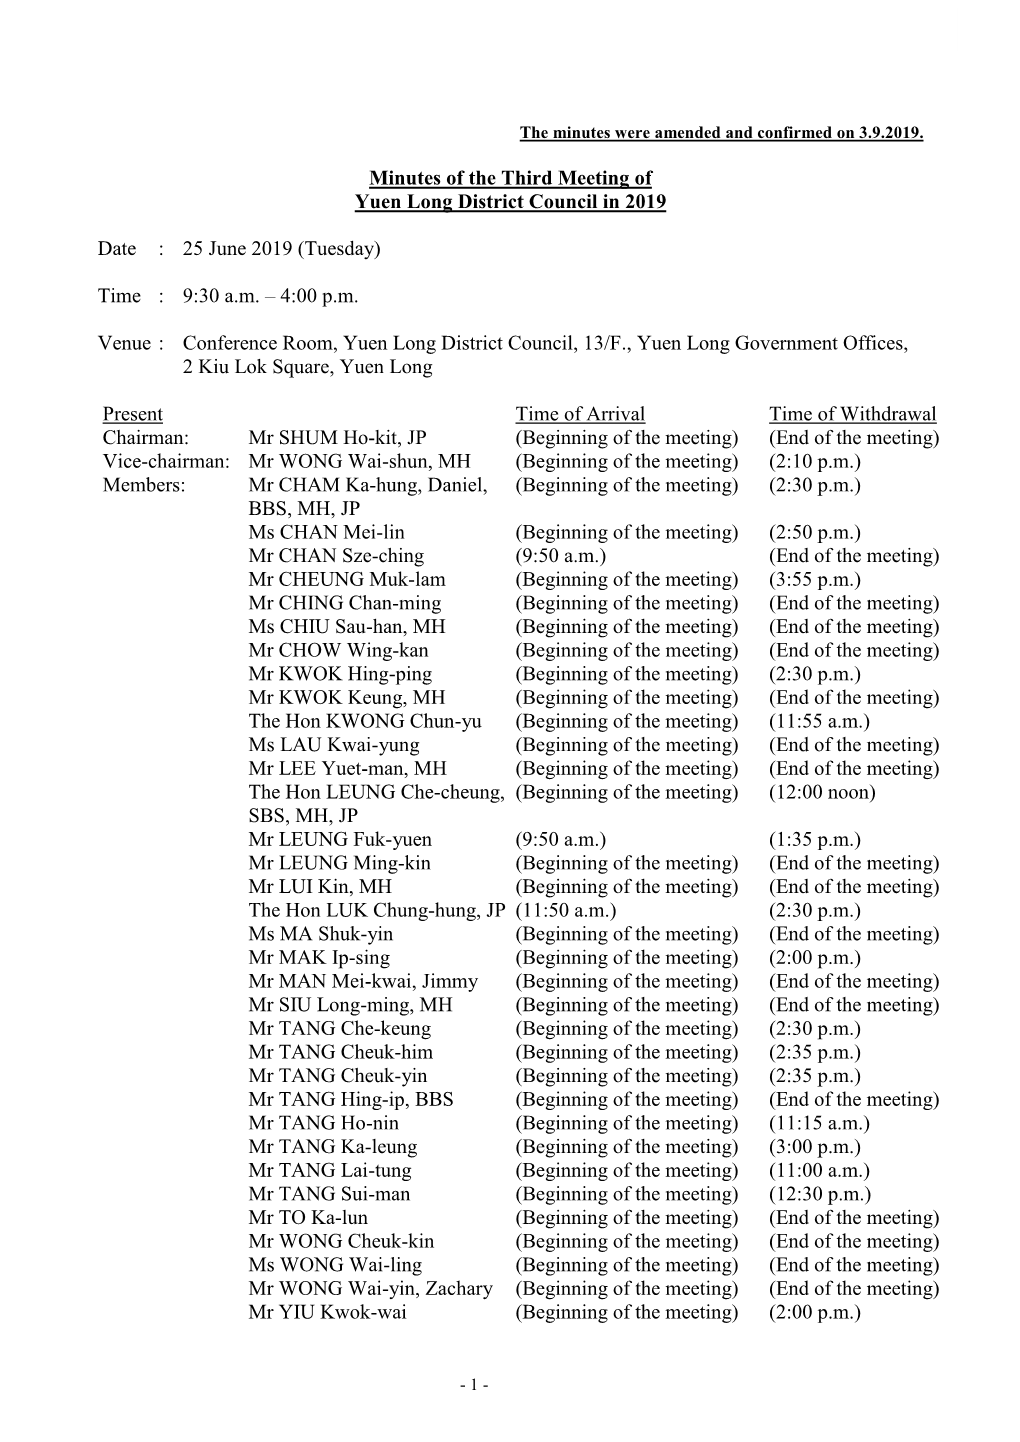 Minutes of the Third Meeting of Yuen Long District Council in 2019 Date